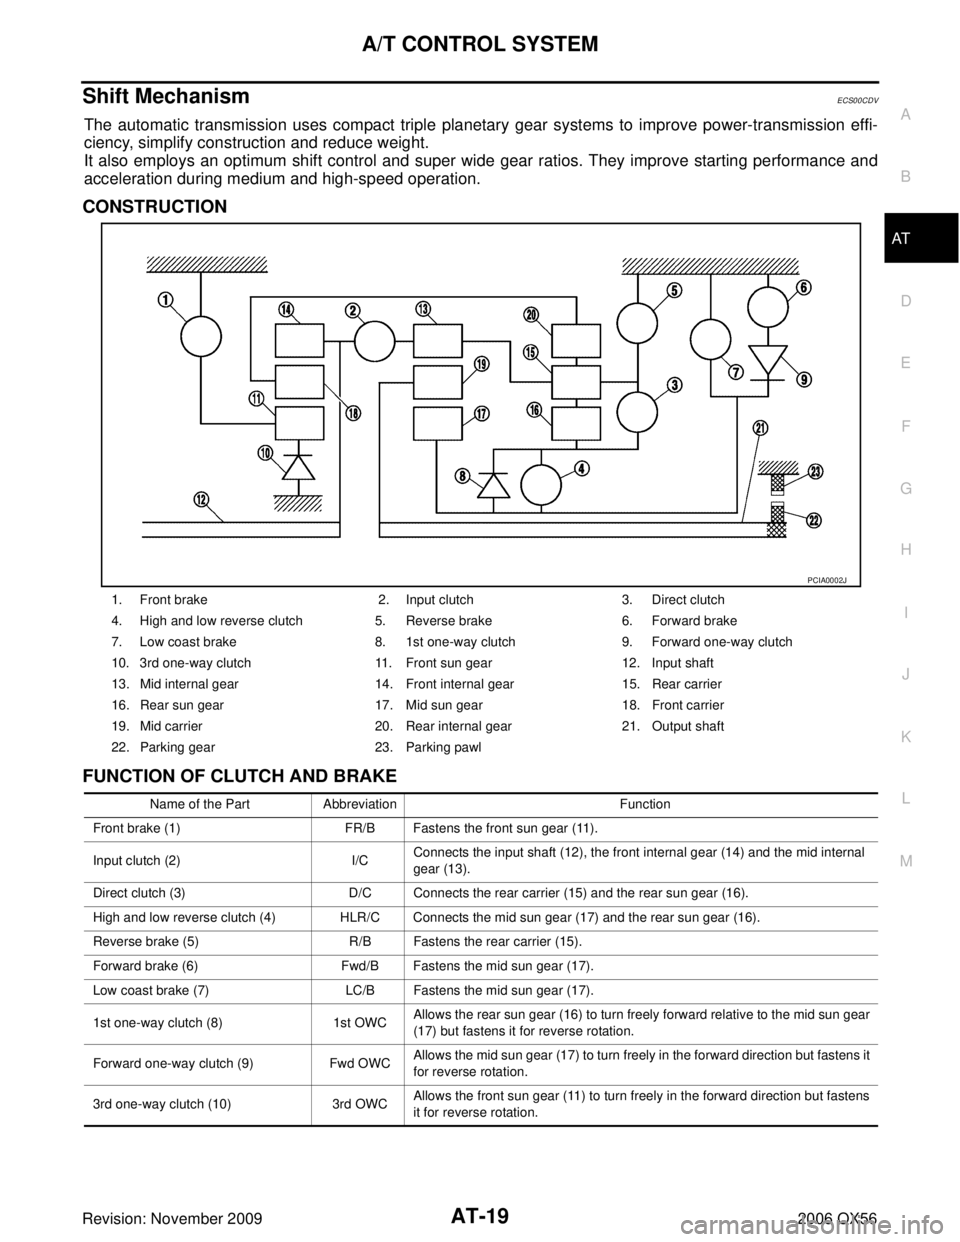 INFINITI QX56 2006  Factory Service Manual A/T CONTROL SYSTEMAT-19
DE
F
G H
I
J
K L
M A
B
AT
Revision: November 2009 2006 QX56
Shift MechanismECS00CDV
The automatic transmission uses compact triple planetary gear systems to improve power-trans